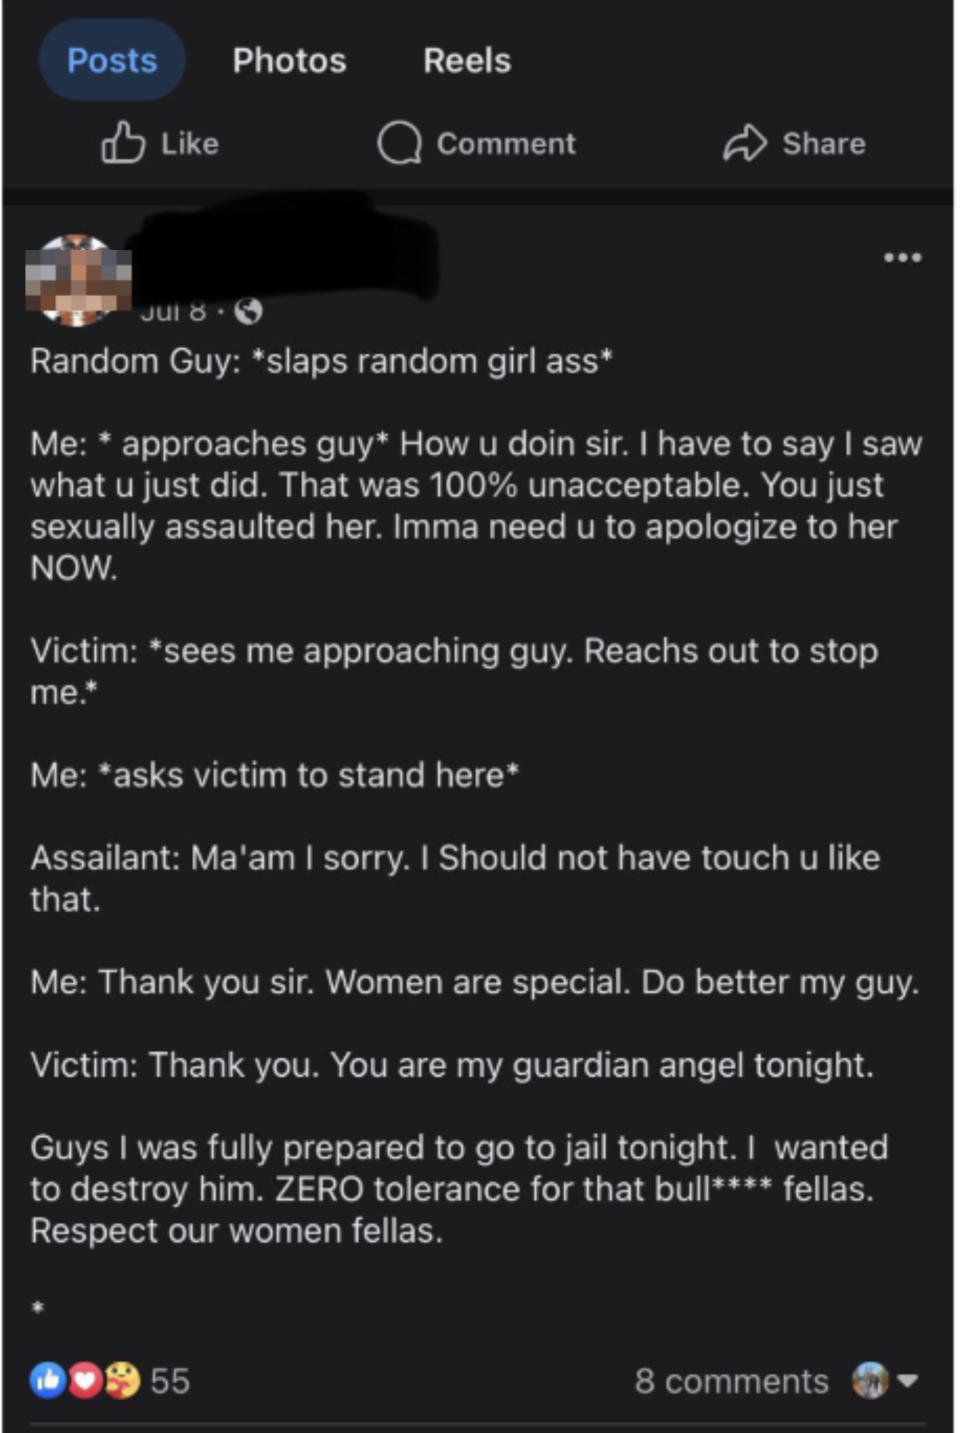 Man approaches guy who randomly slapped a girl's ass and says "you sexually assaulted her," tells him to apologize, which the assailant does, and the woman calls him her guardian angel; guy says he was "prepared to go to jail"